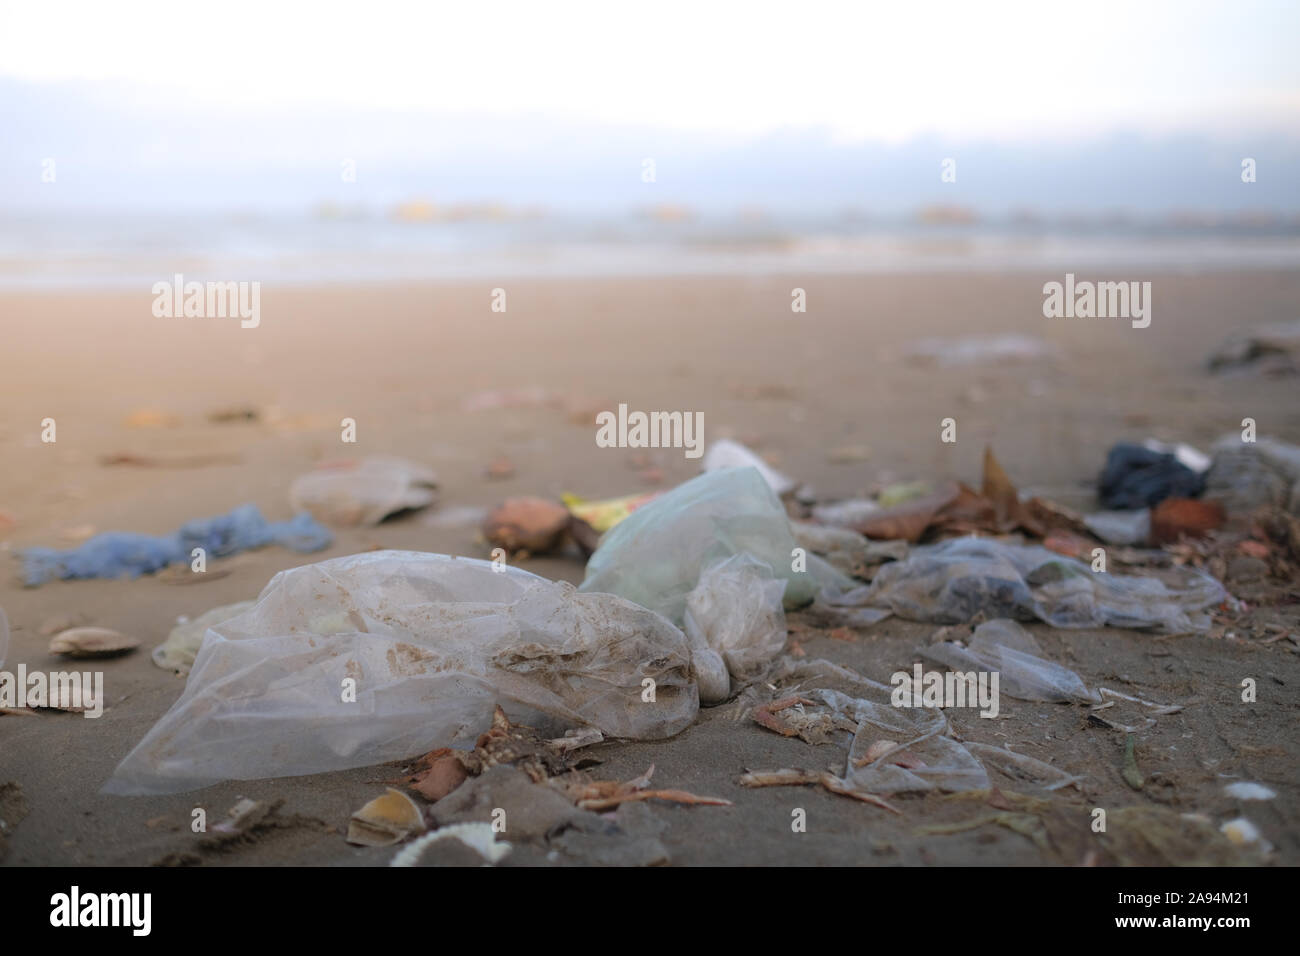 Close-up Of Fantasy Mermaid In Deep Ocean Sad Because Water Pollution.  Plastic Trash And Bottles Pollution In Ocean. Ecocatastrophe, Garbage And  Plastic Recycling Concept. Stock Photo, Picture and Royalty Free Image.  Image